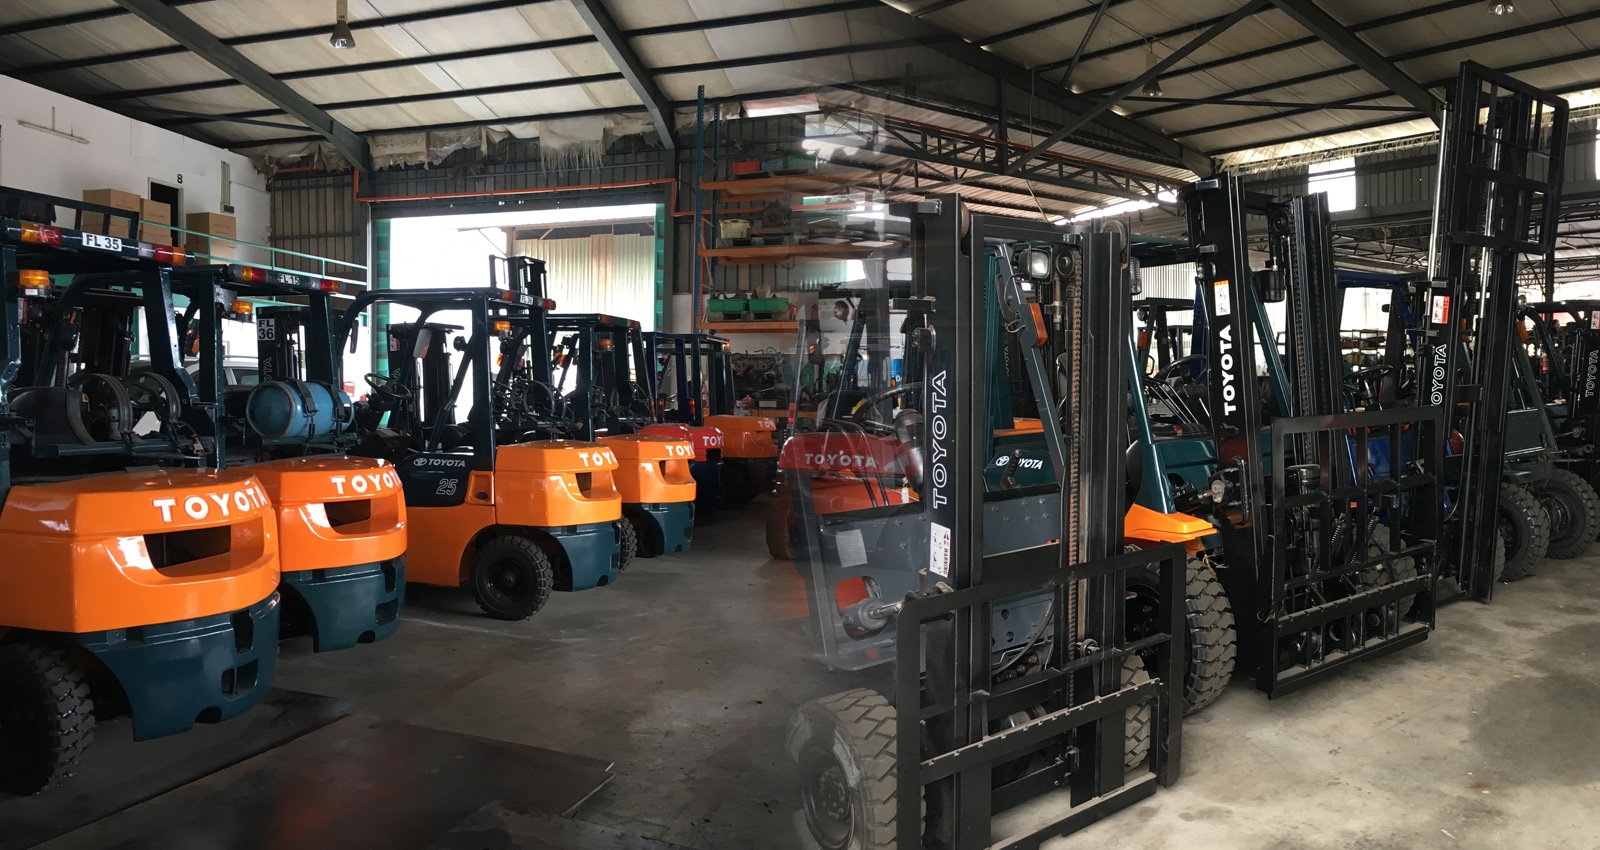 Toyota Forklift Malaysia Forklift Rental Forklift Repair Second Hand Forklift Forklift Spare Parts Used Forklift Malaysia